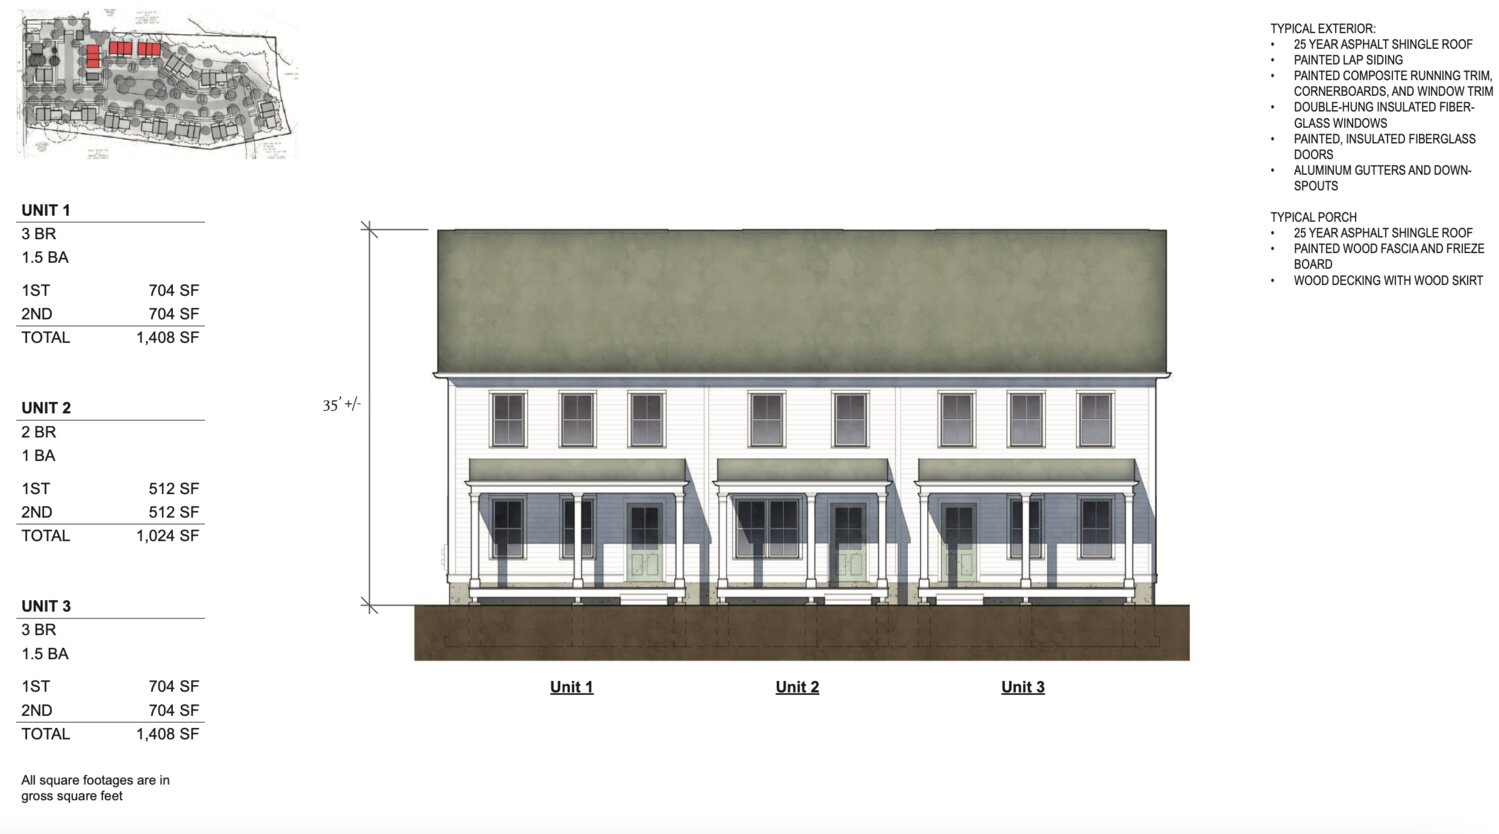 An elevation rendering shows how one town house would be split into three units, with a mix of three-bedroom and two-bedroom apartments inside. The total number of units in the development is 40, with 88 total bedrooms.